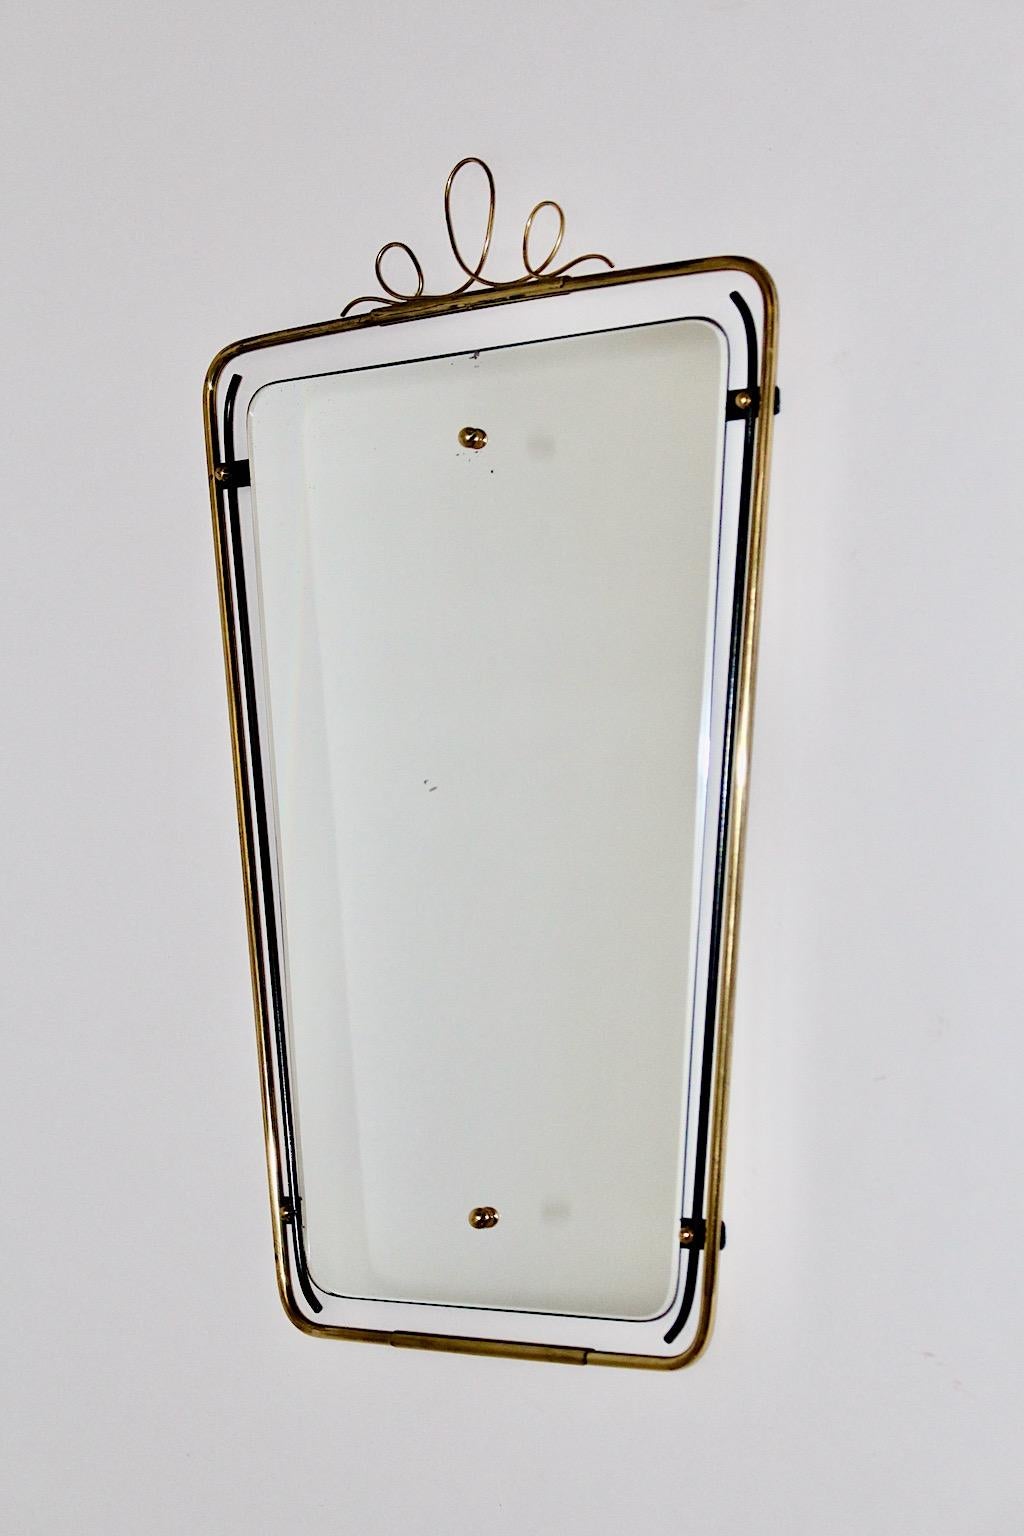 Mid Century Modern vintage wall mirror in rectangular form from brass and black metal wire 1950s Italy.
Decorated with brass bullets on each side and cute loops on the upper part the rectangular wall mirror provides a dose of easygoing chic for